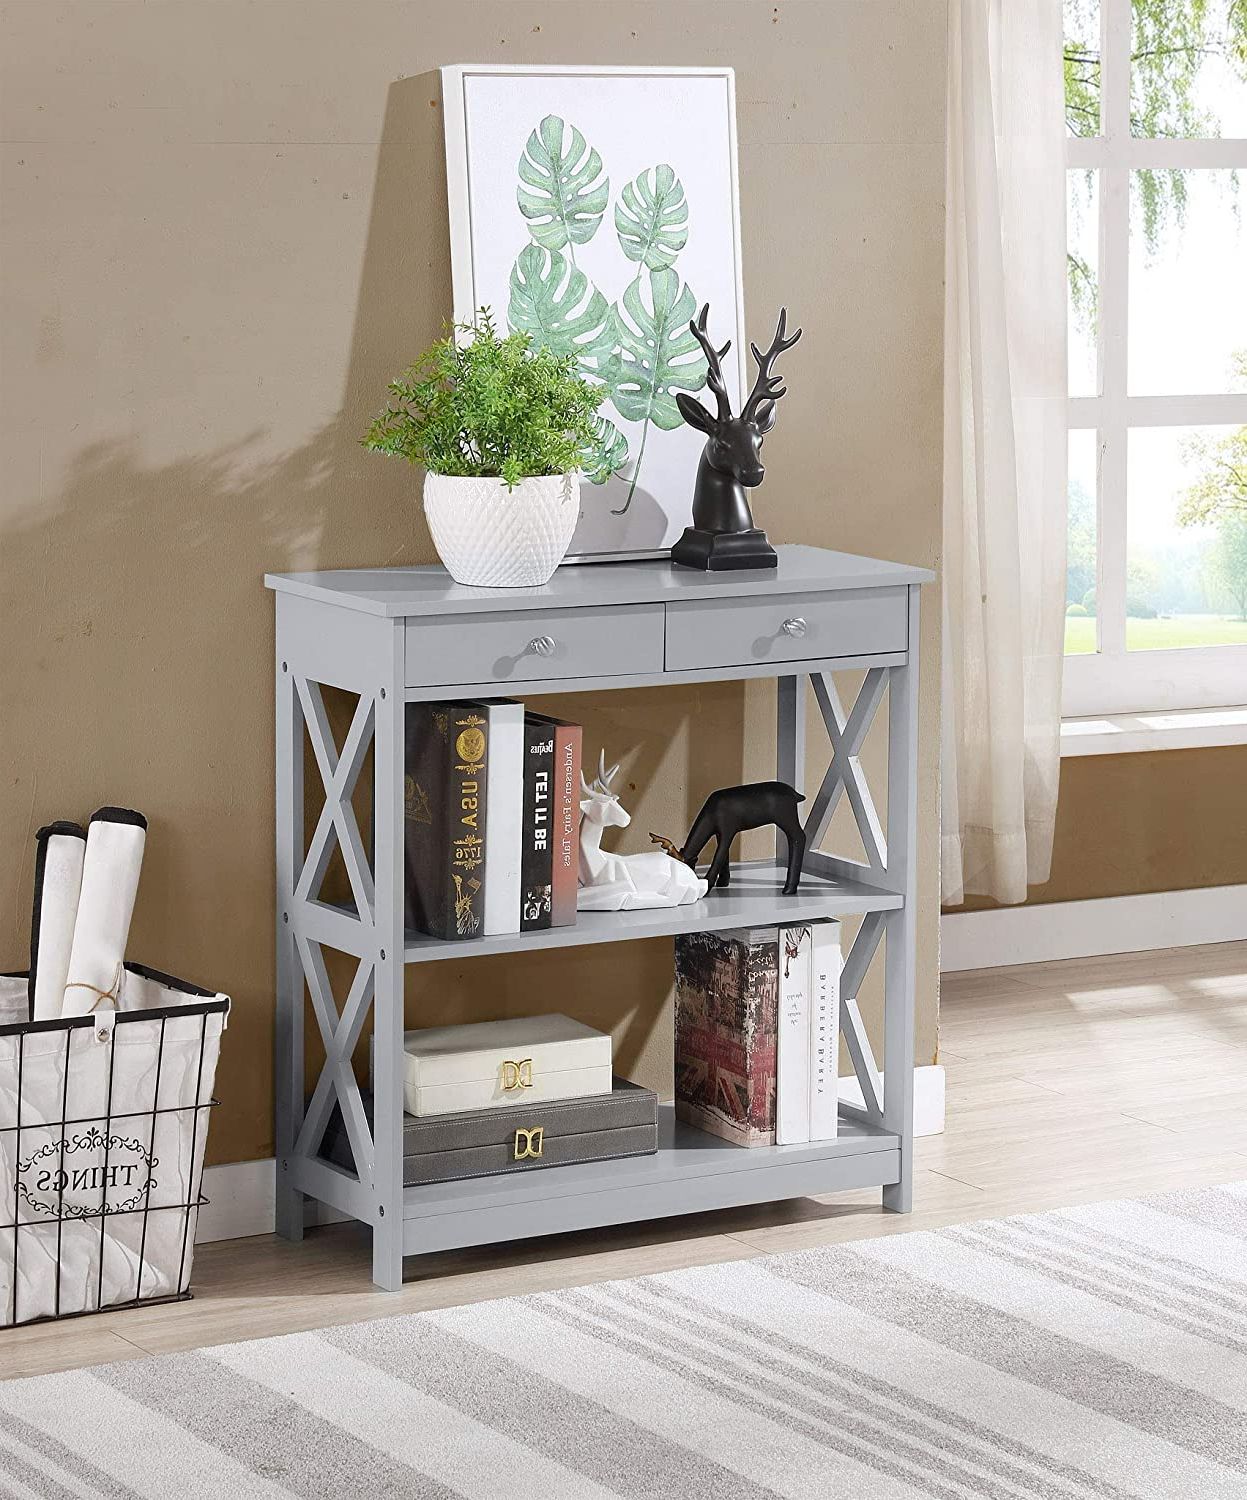 2020 Amazon: Grey Finish 3 Tier Console Sofa Entry Table In 3 Tier Console Tables (View 3 of 10)